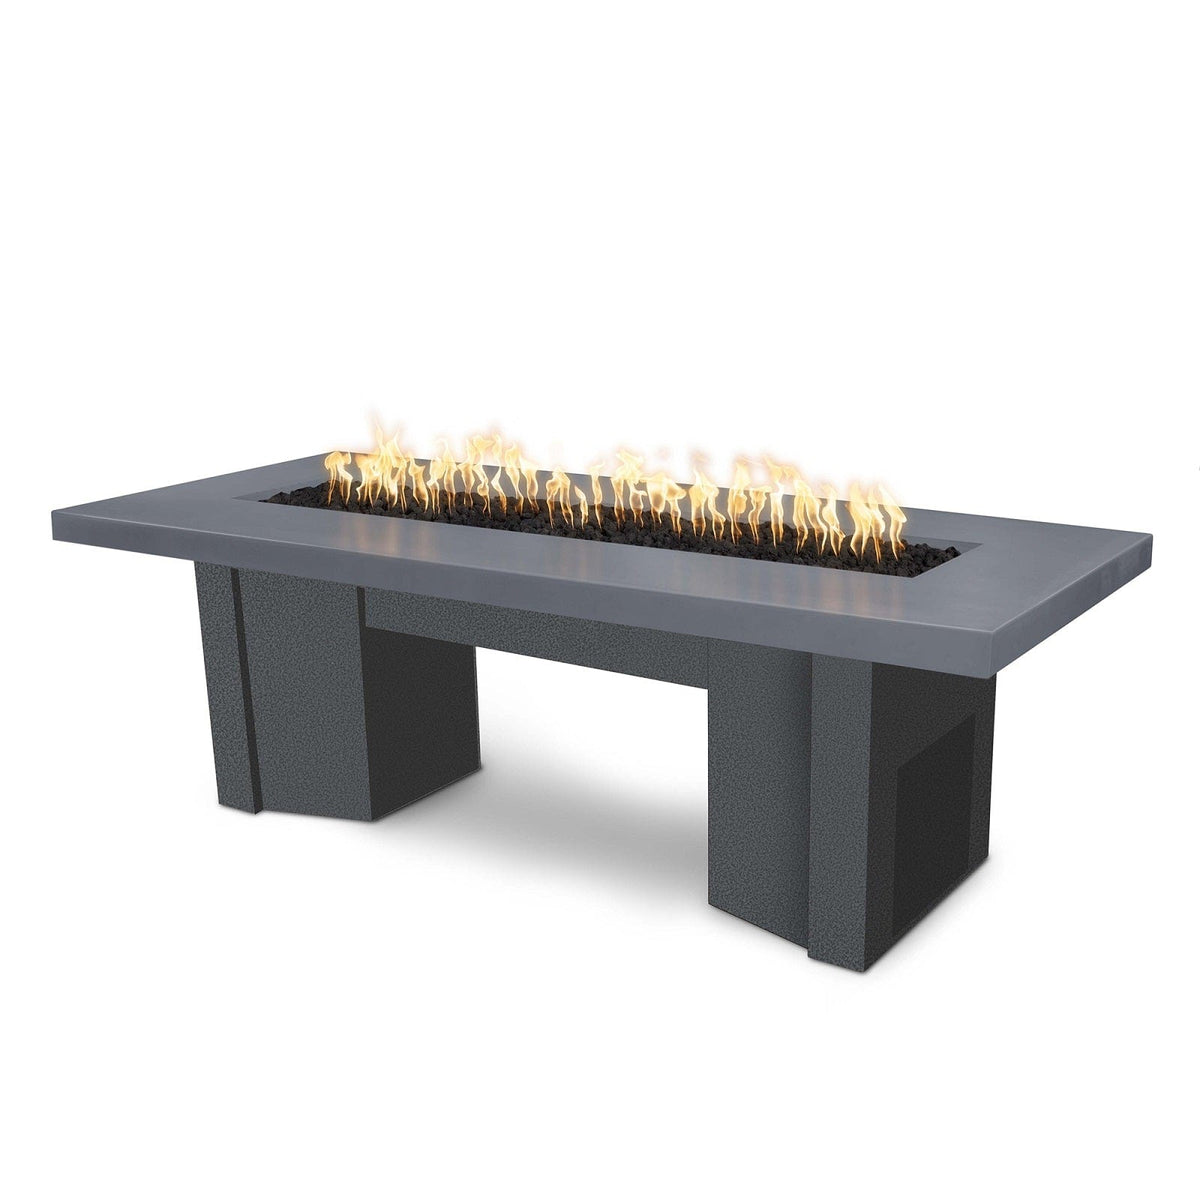 The Outdoor Plus Fire Features Gray (-GRY) / Silver Vein Powder Coated Steel (-SLV) The Outdoor Plus 60&quot; Alameda Fire Table Smooth Concrete in Liquid Propane - Flame Sense System with Push Button Spark Igniter / OPT-ALMGFRC60FSEN-LP